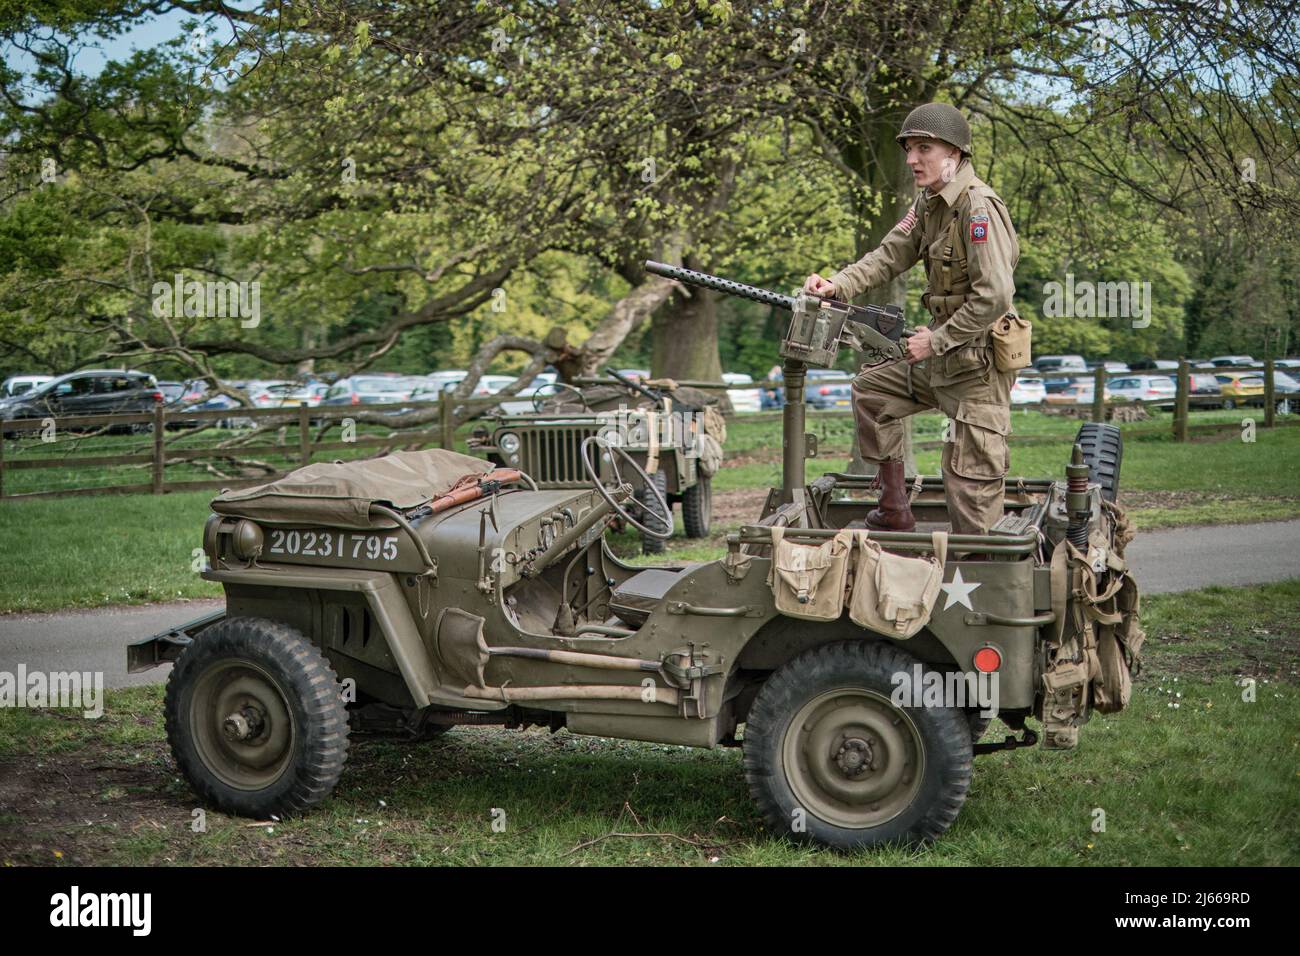 American Airborne re-enactors in Jeeps guard a checkpoint at the entrance to the No Man's Land 2022 event at Bodrhyddan Hall, Wales Stock Photo